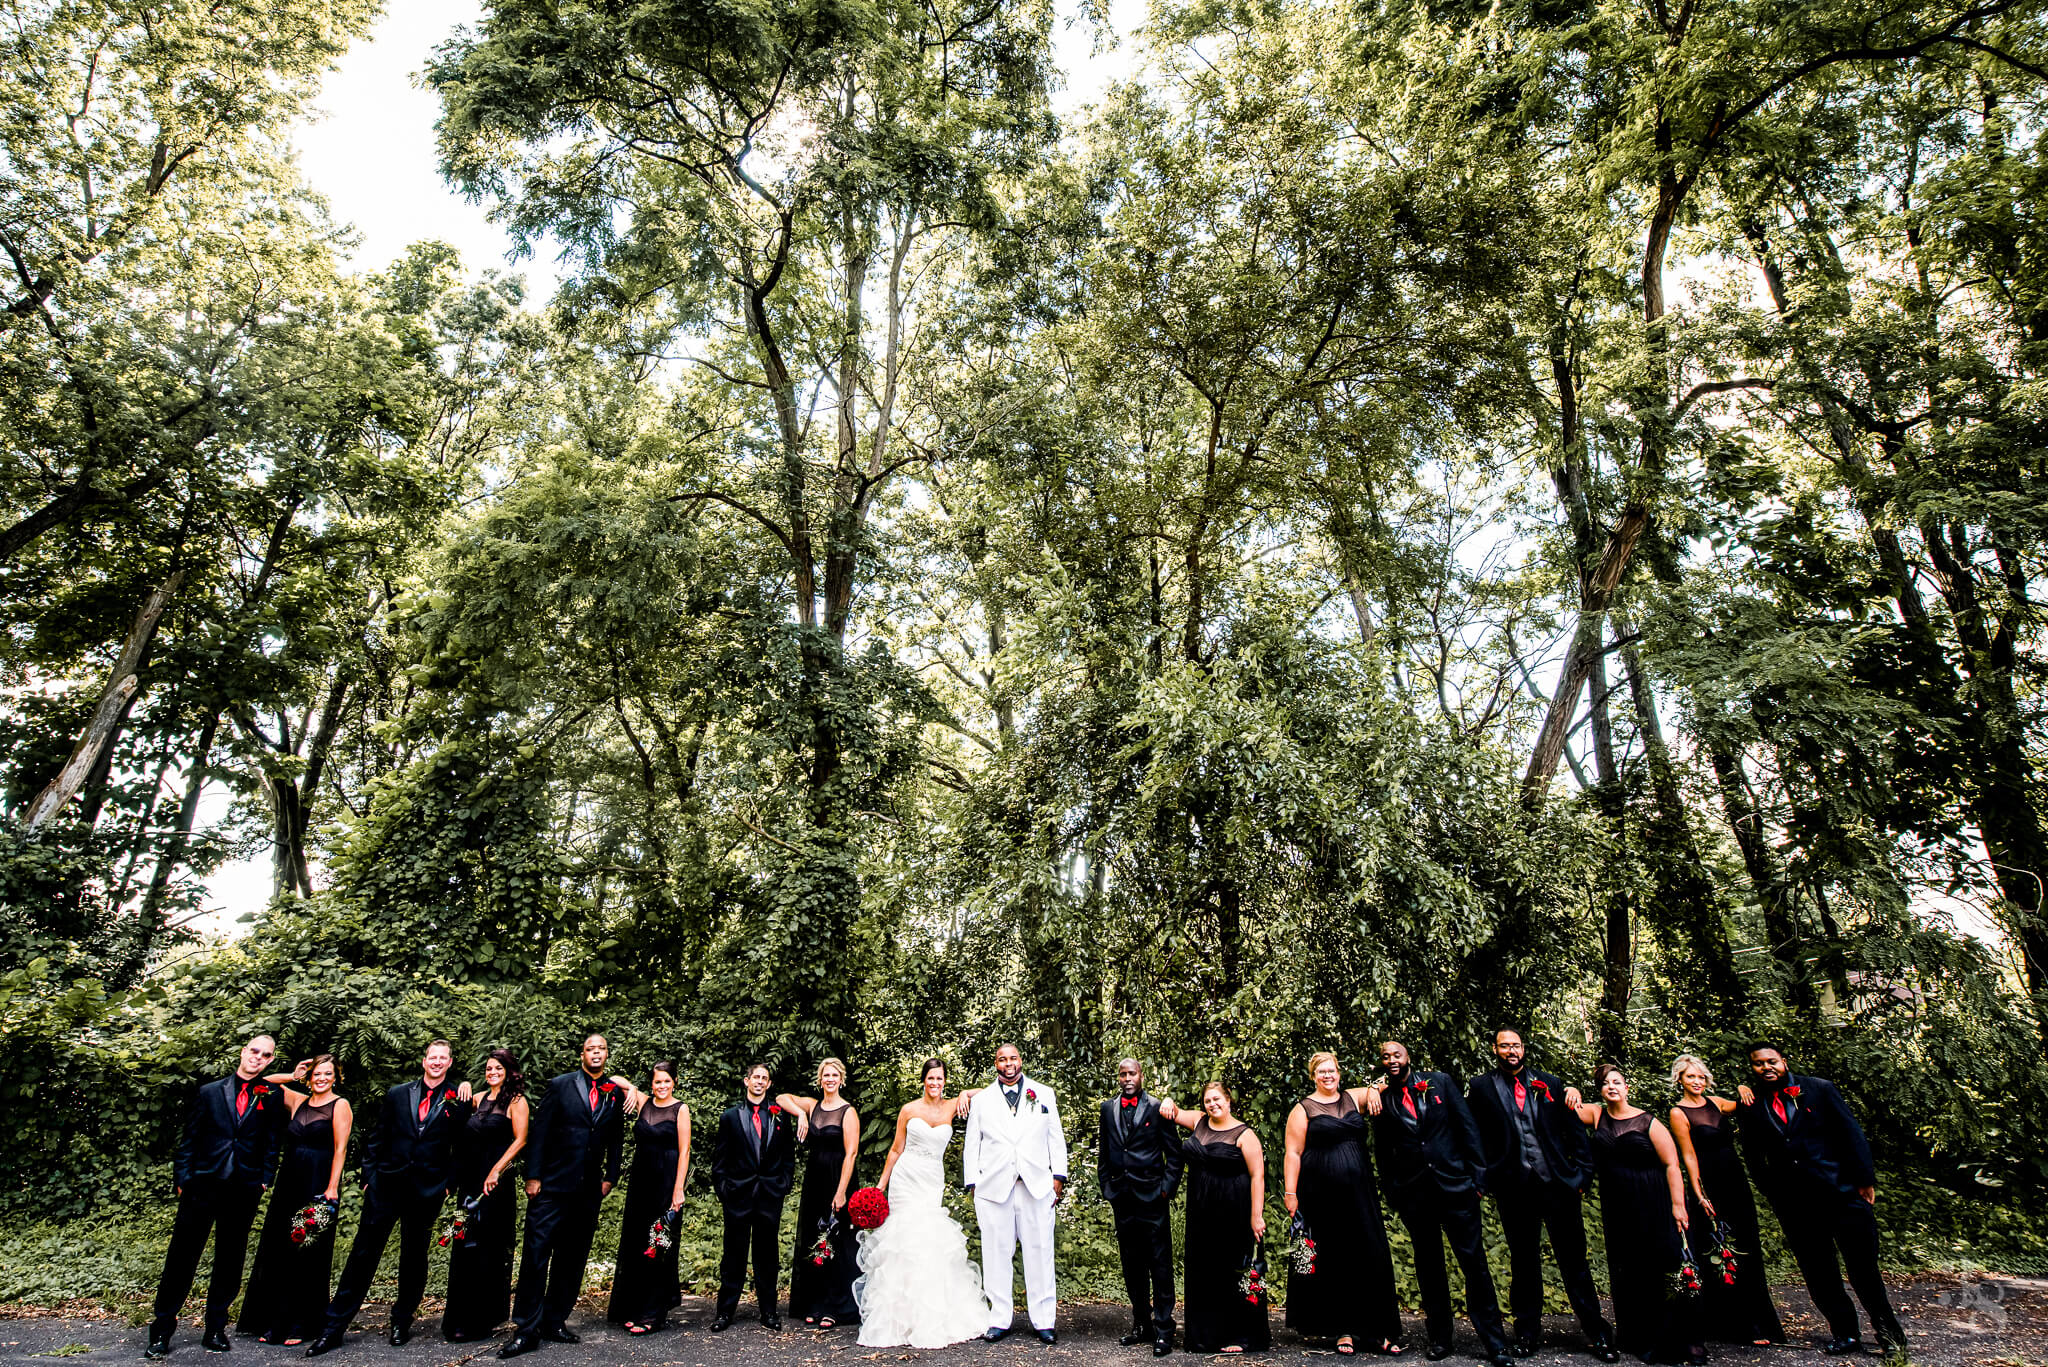 large wedding party in grassy area on wedding day